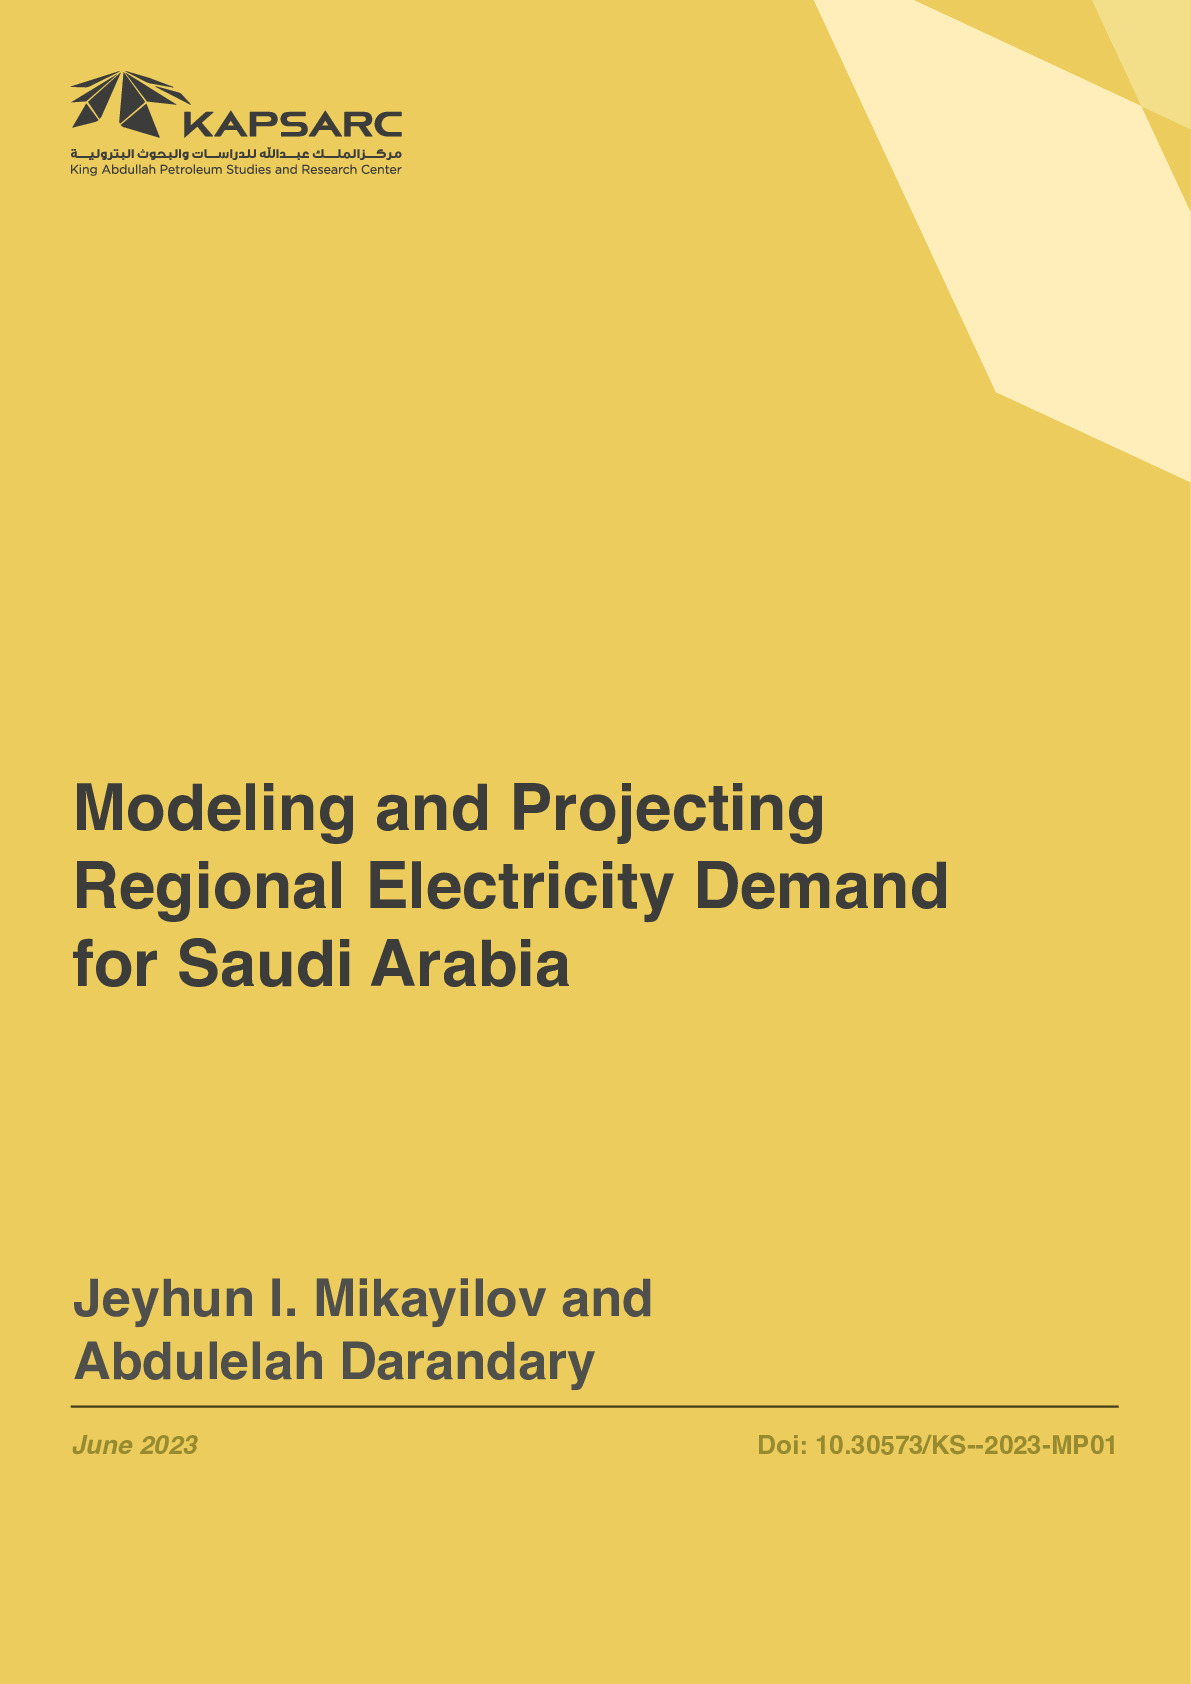 Modeling and Projecting Regional Electricity Demand for Saudi Arabia